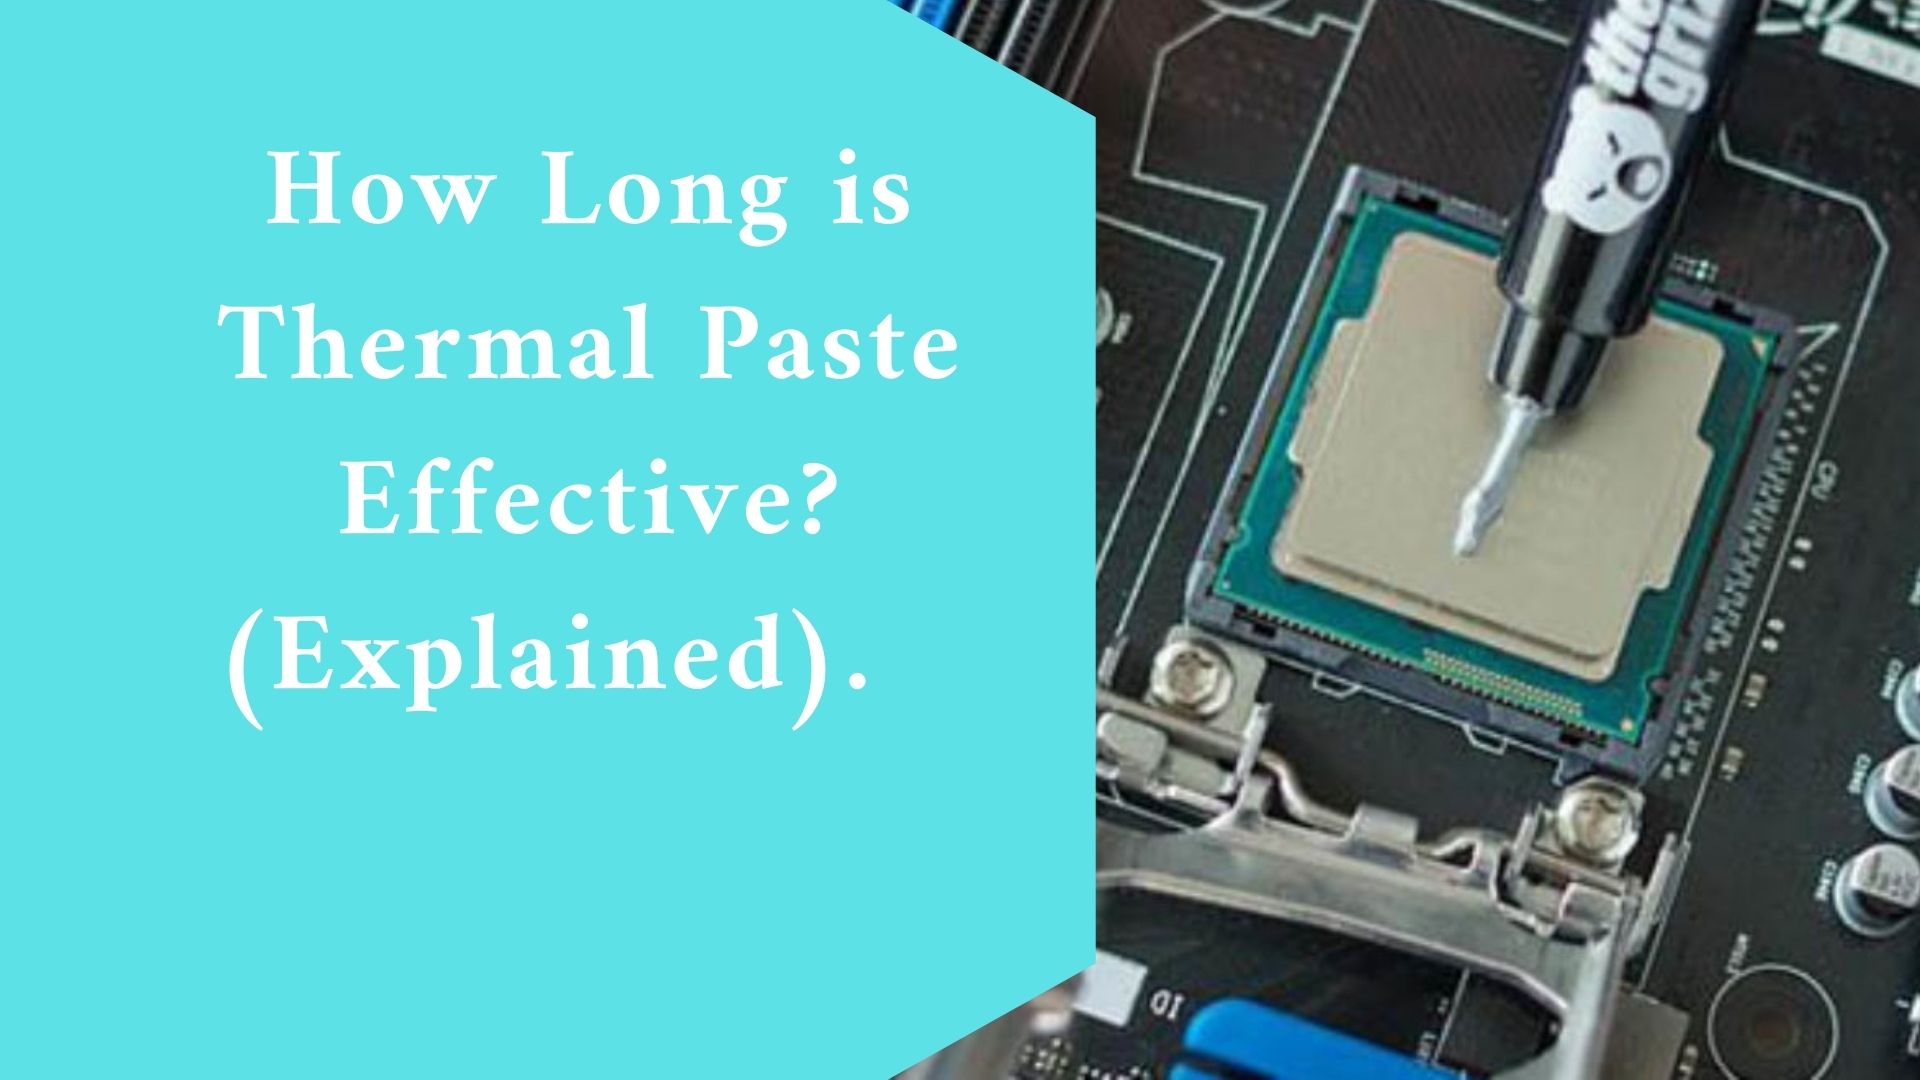 How Long is Thermal Paste Effective? (Explained)